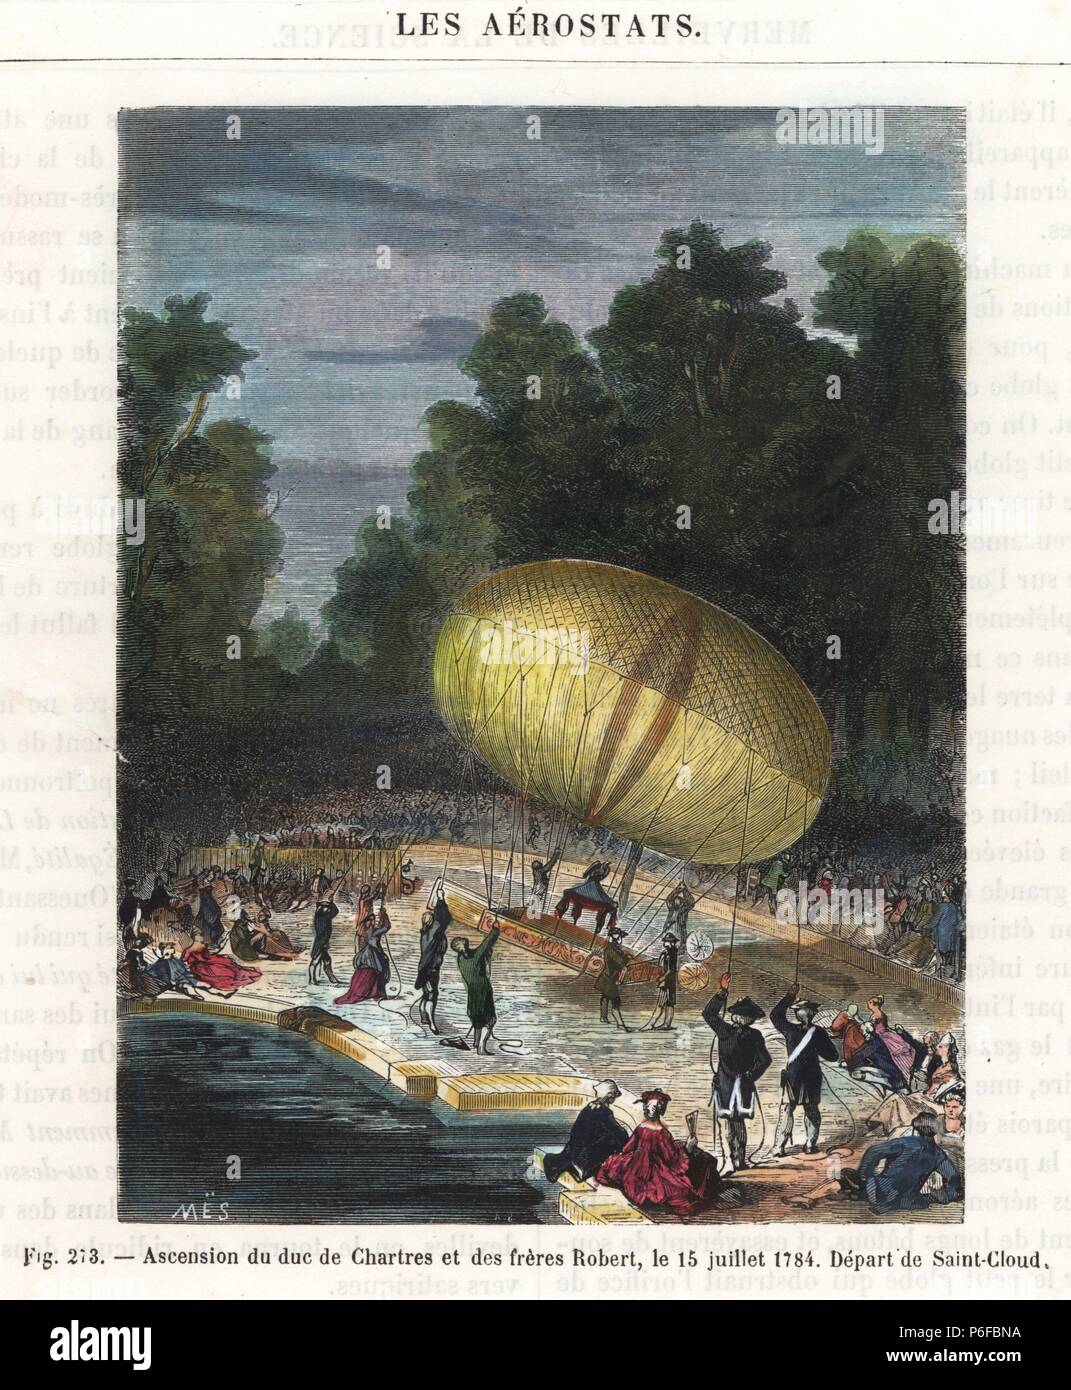 Flight in a dirigible balloon by the Duc de Chartres and the Robert brothers, Anne-Jean and Nicolas-Louis, July 15, 1784. The brothers flew for 45 minutes in the elongated craft. Handcolored engraving from Louis Figuier's 'Les Merveilles de la Science: Les Aerostats,' Furne, Jouvet et Cie, Paris, 1870. Stock Photo